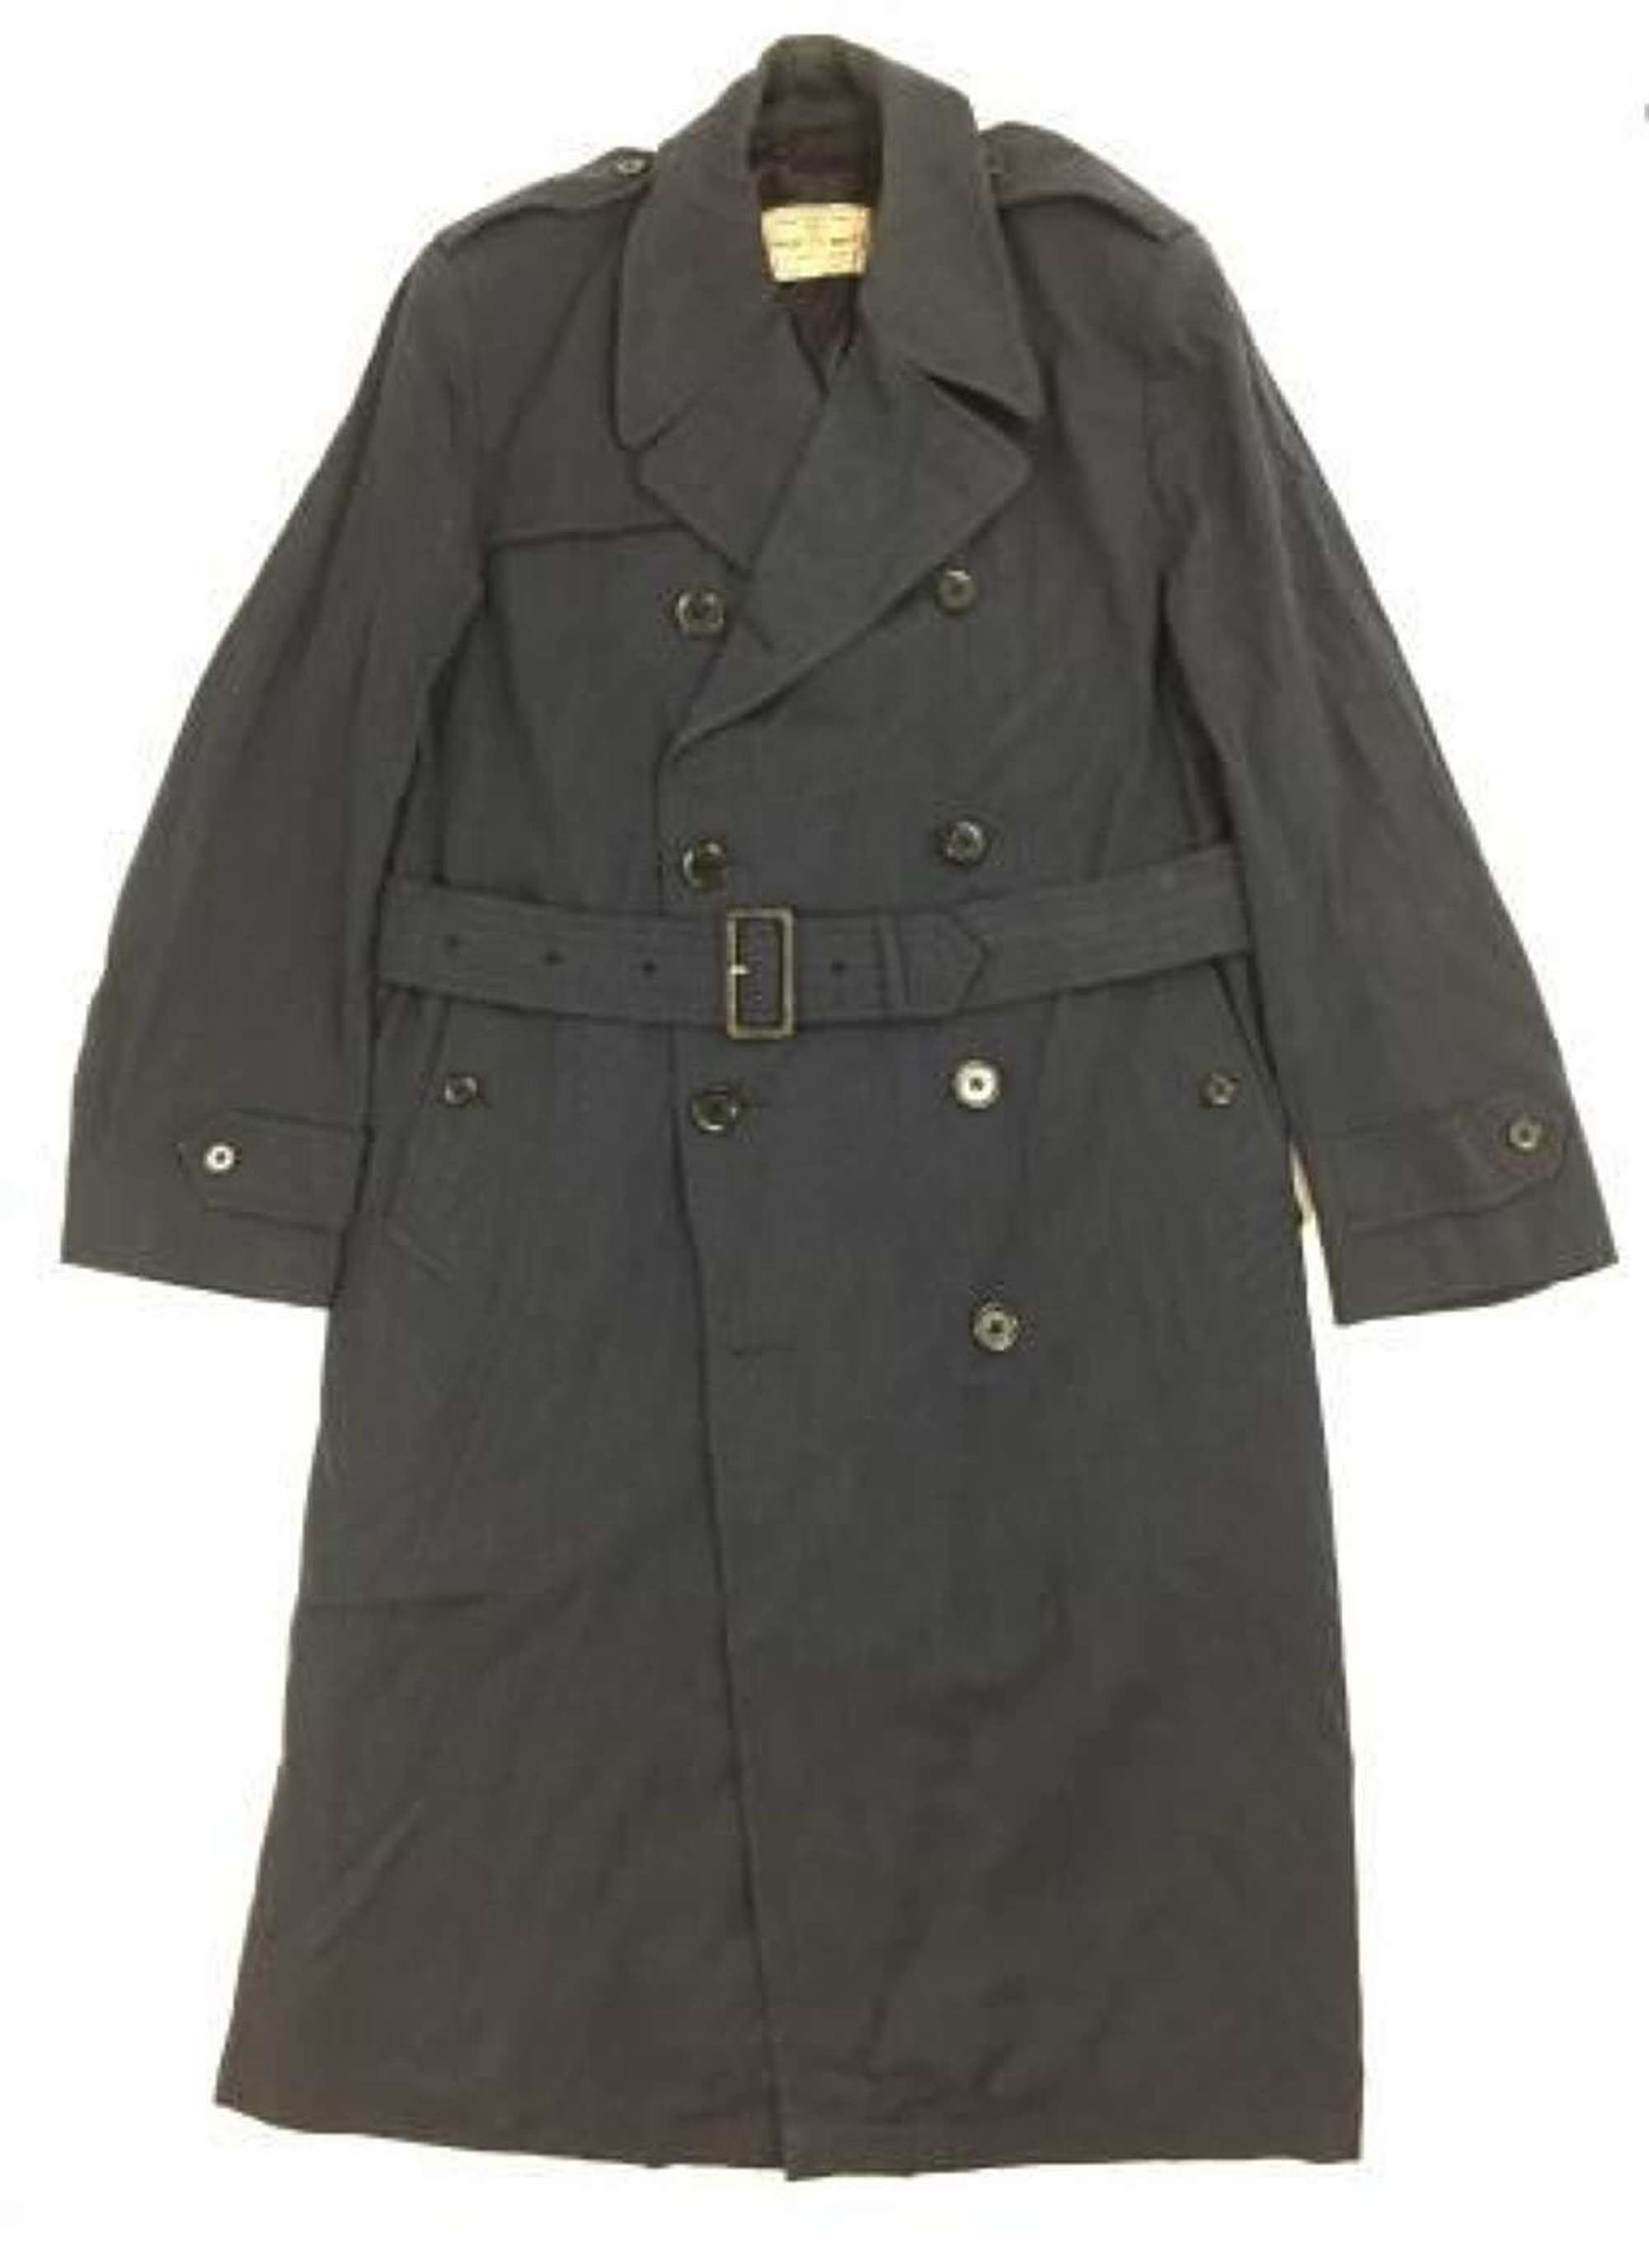 RAF Officers Raincoat to Battle of Britain Fighter Pilot Peter Parrot